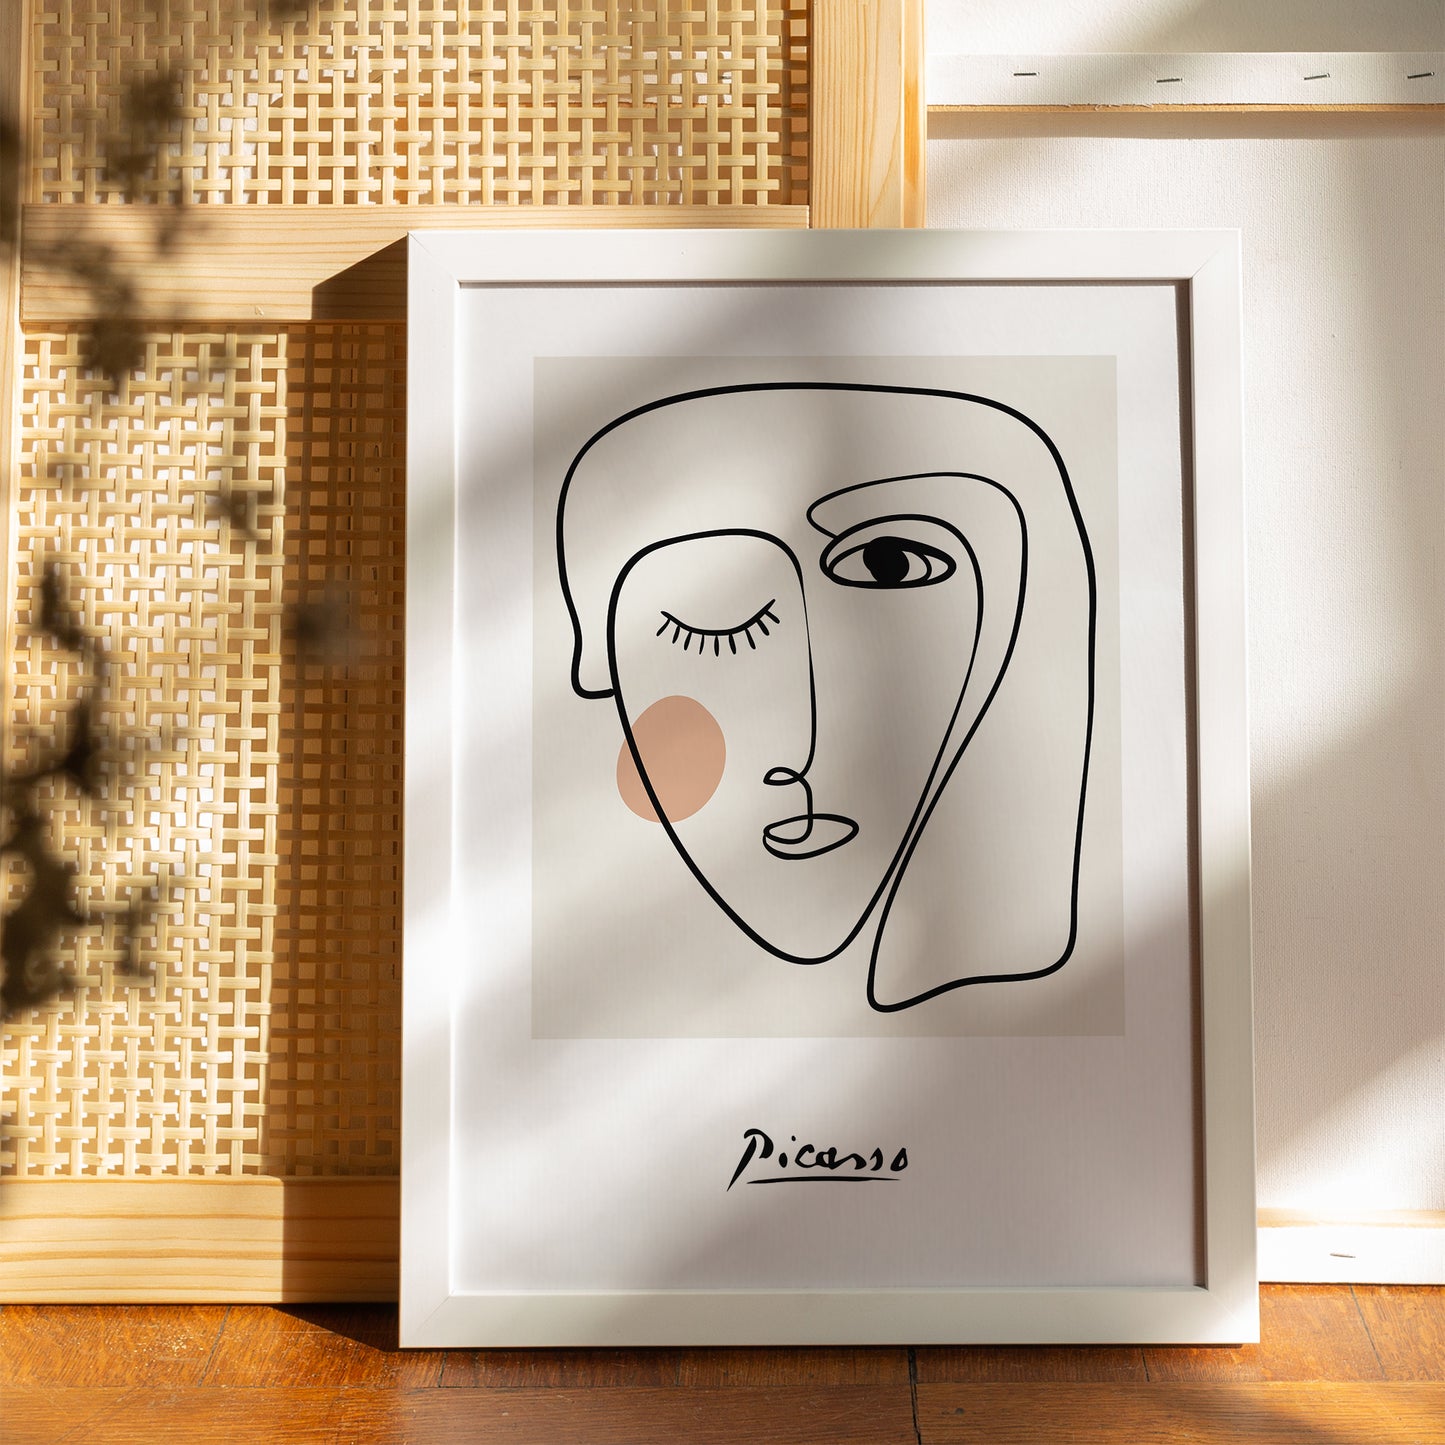 Picasso Inspired Face Poster